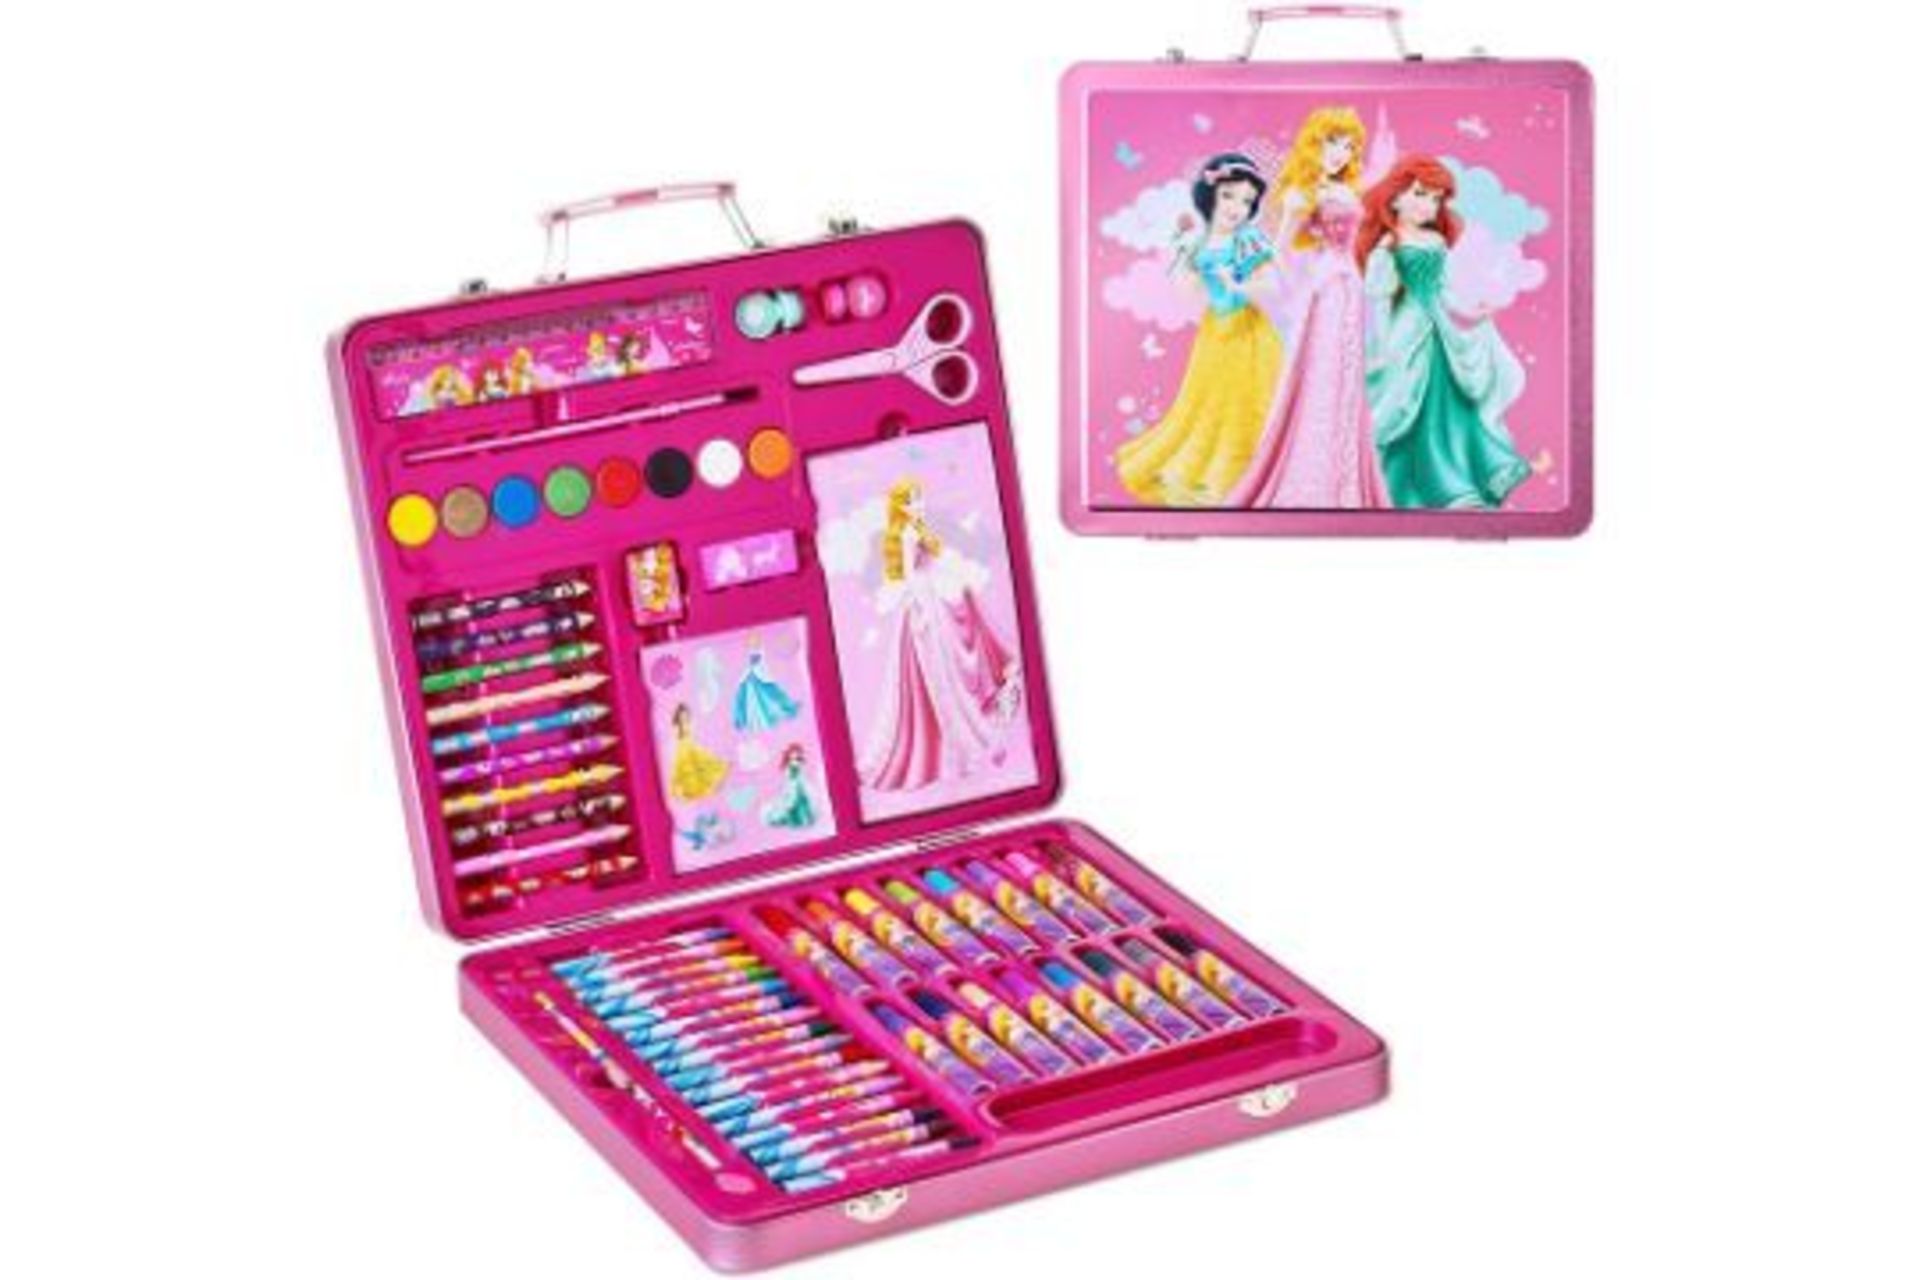 PALLET TO CONTAIN 120 X NEW Disney Princess Tin Art Case. (ROW 4) Excellent for budding artists,